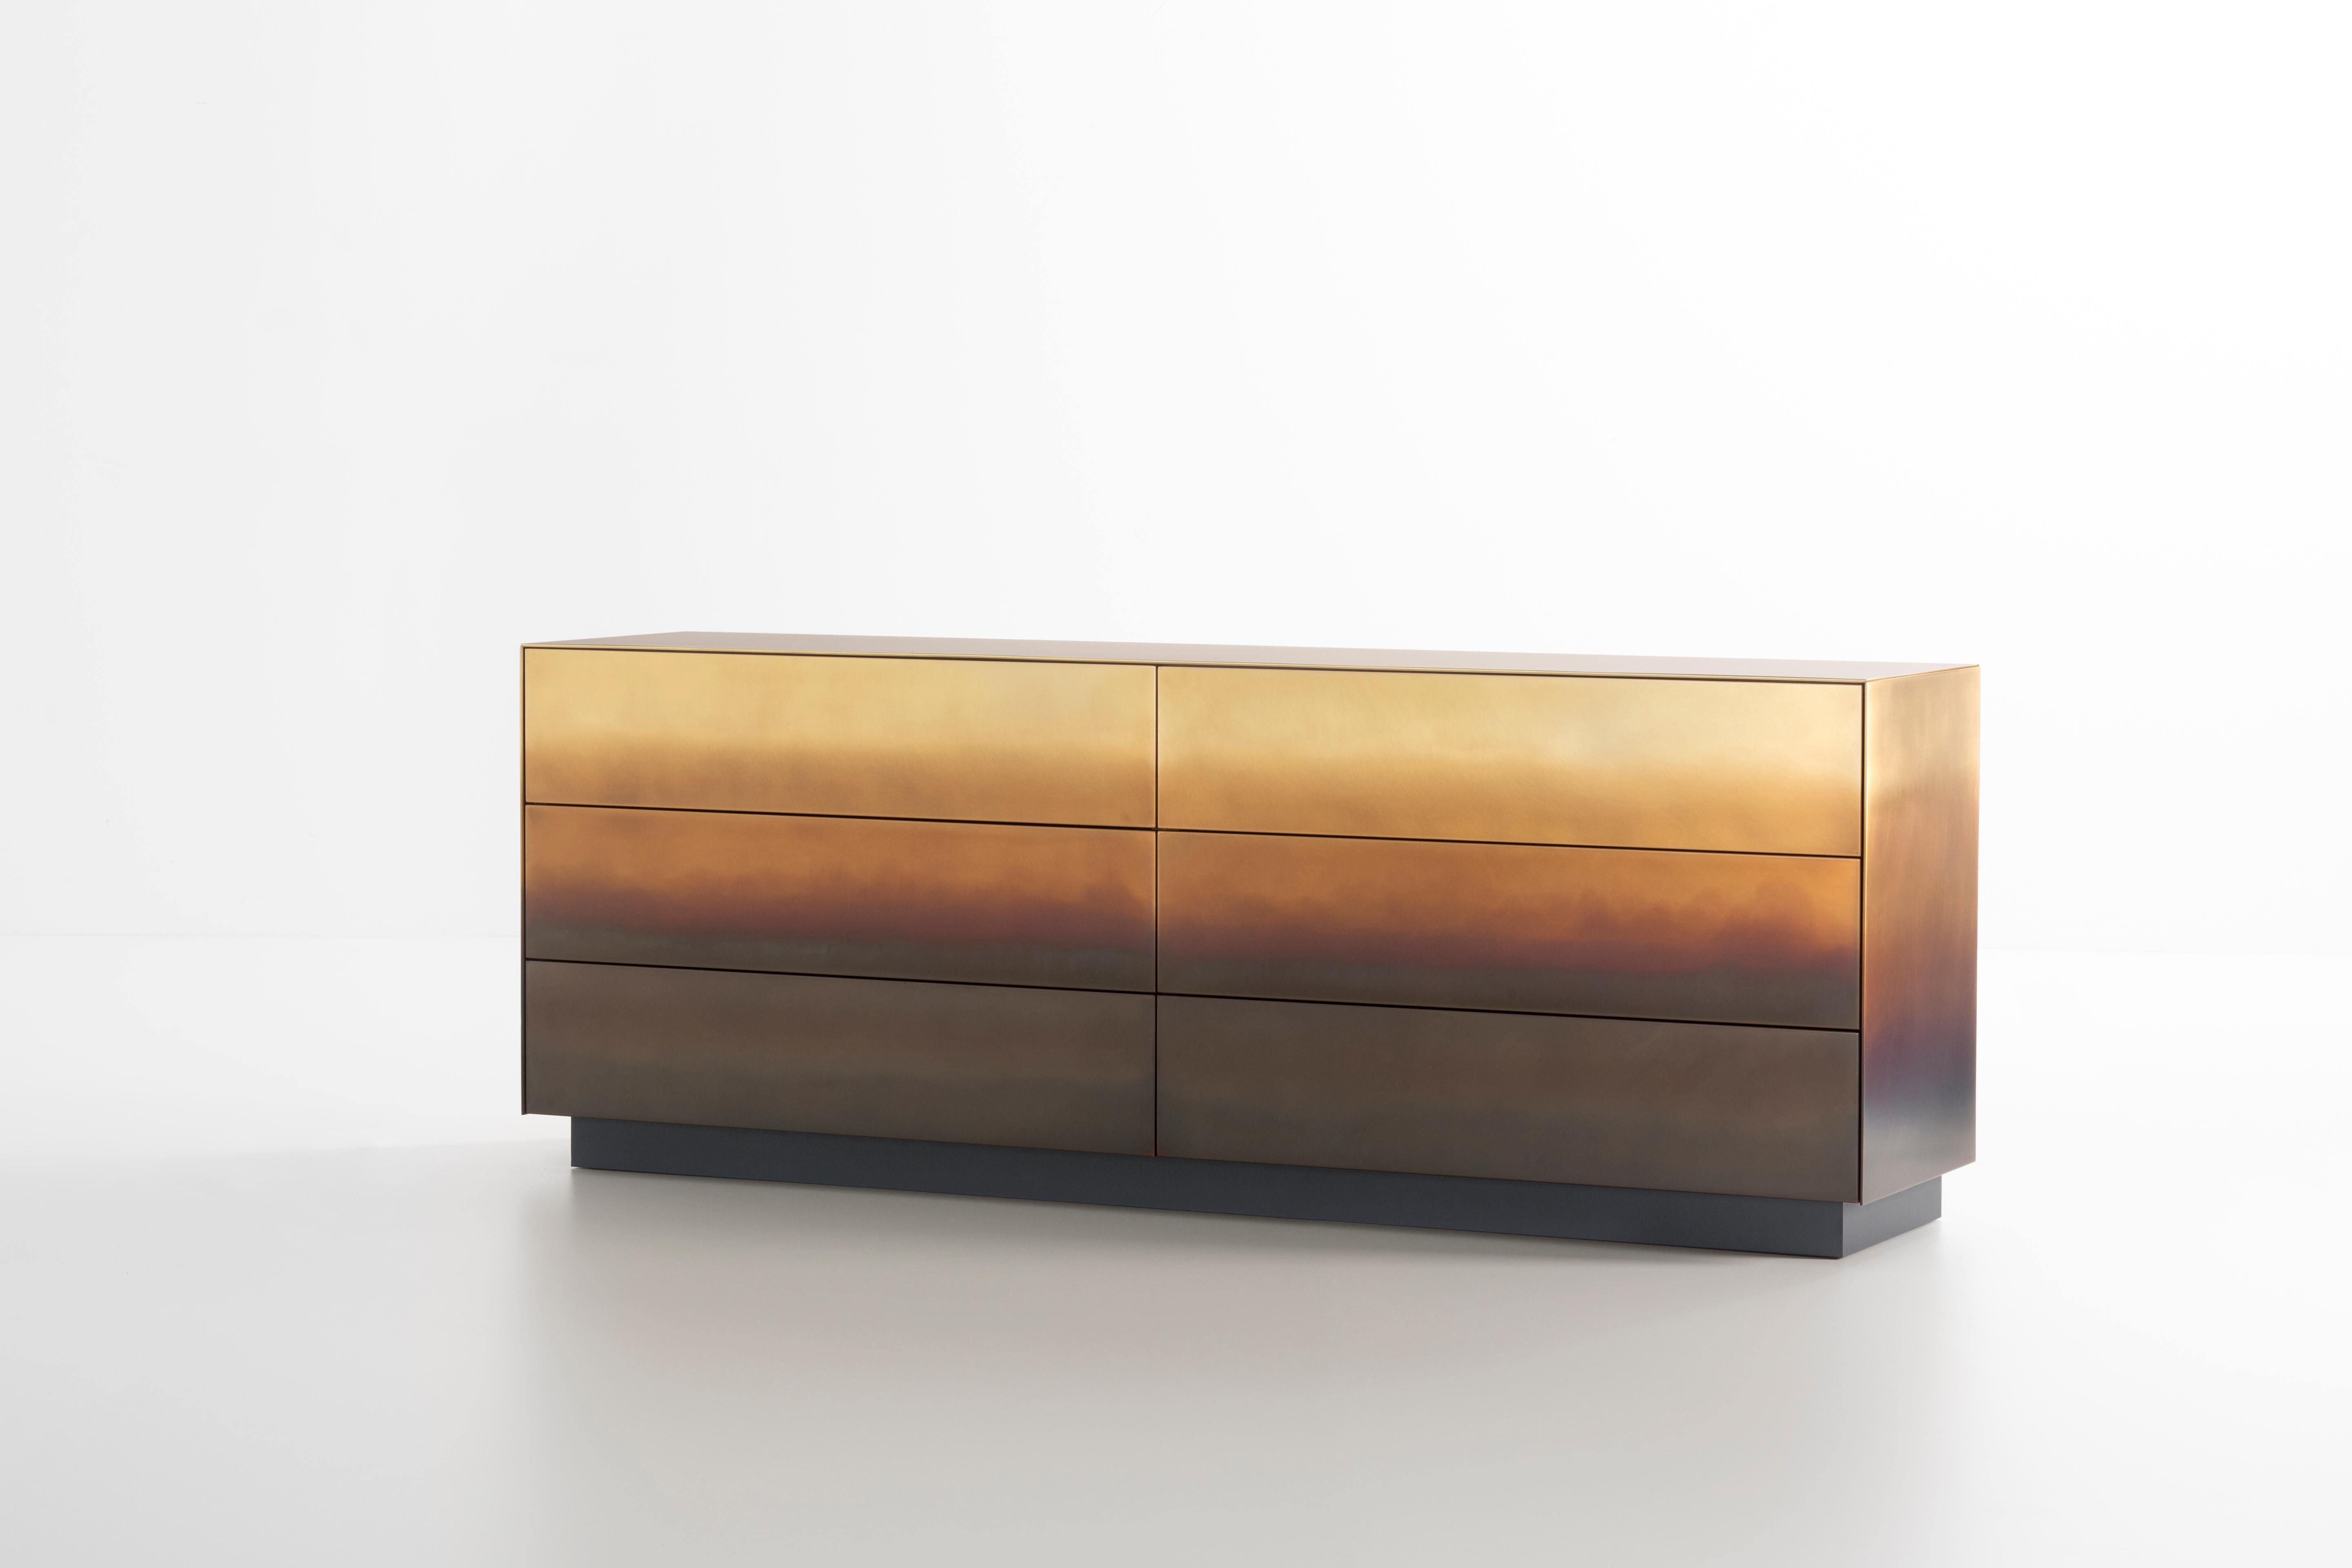 The traces of time are drawn one on top of another, infused into the changing skin of the rigorous metal forms that define these cabinets and chests. Like the tide (marea in Italian) leaves its mark, wave after wave, even here the hand of the